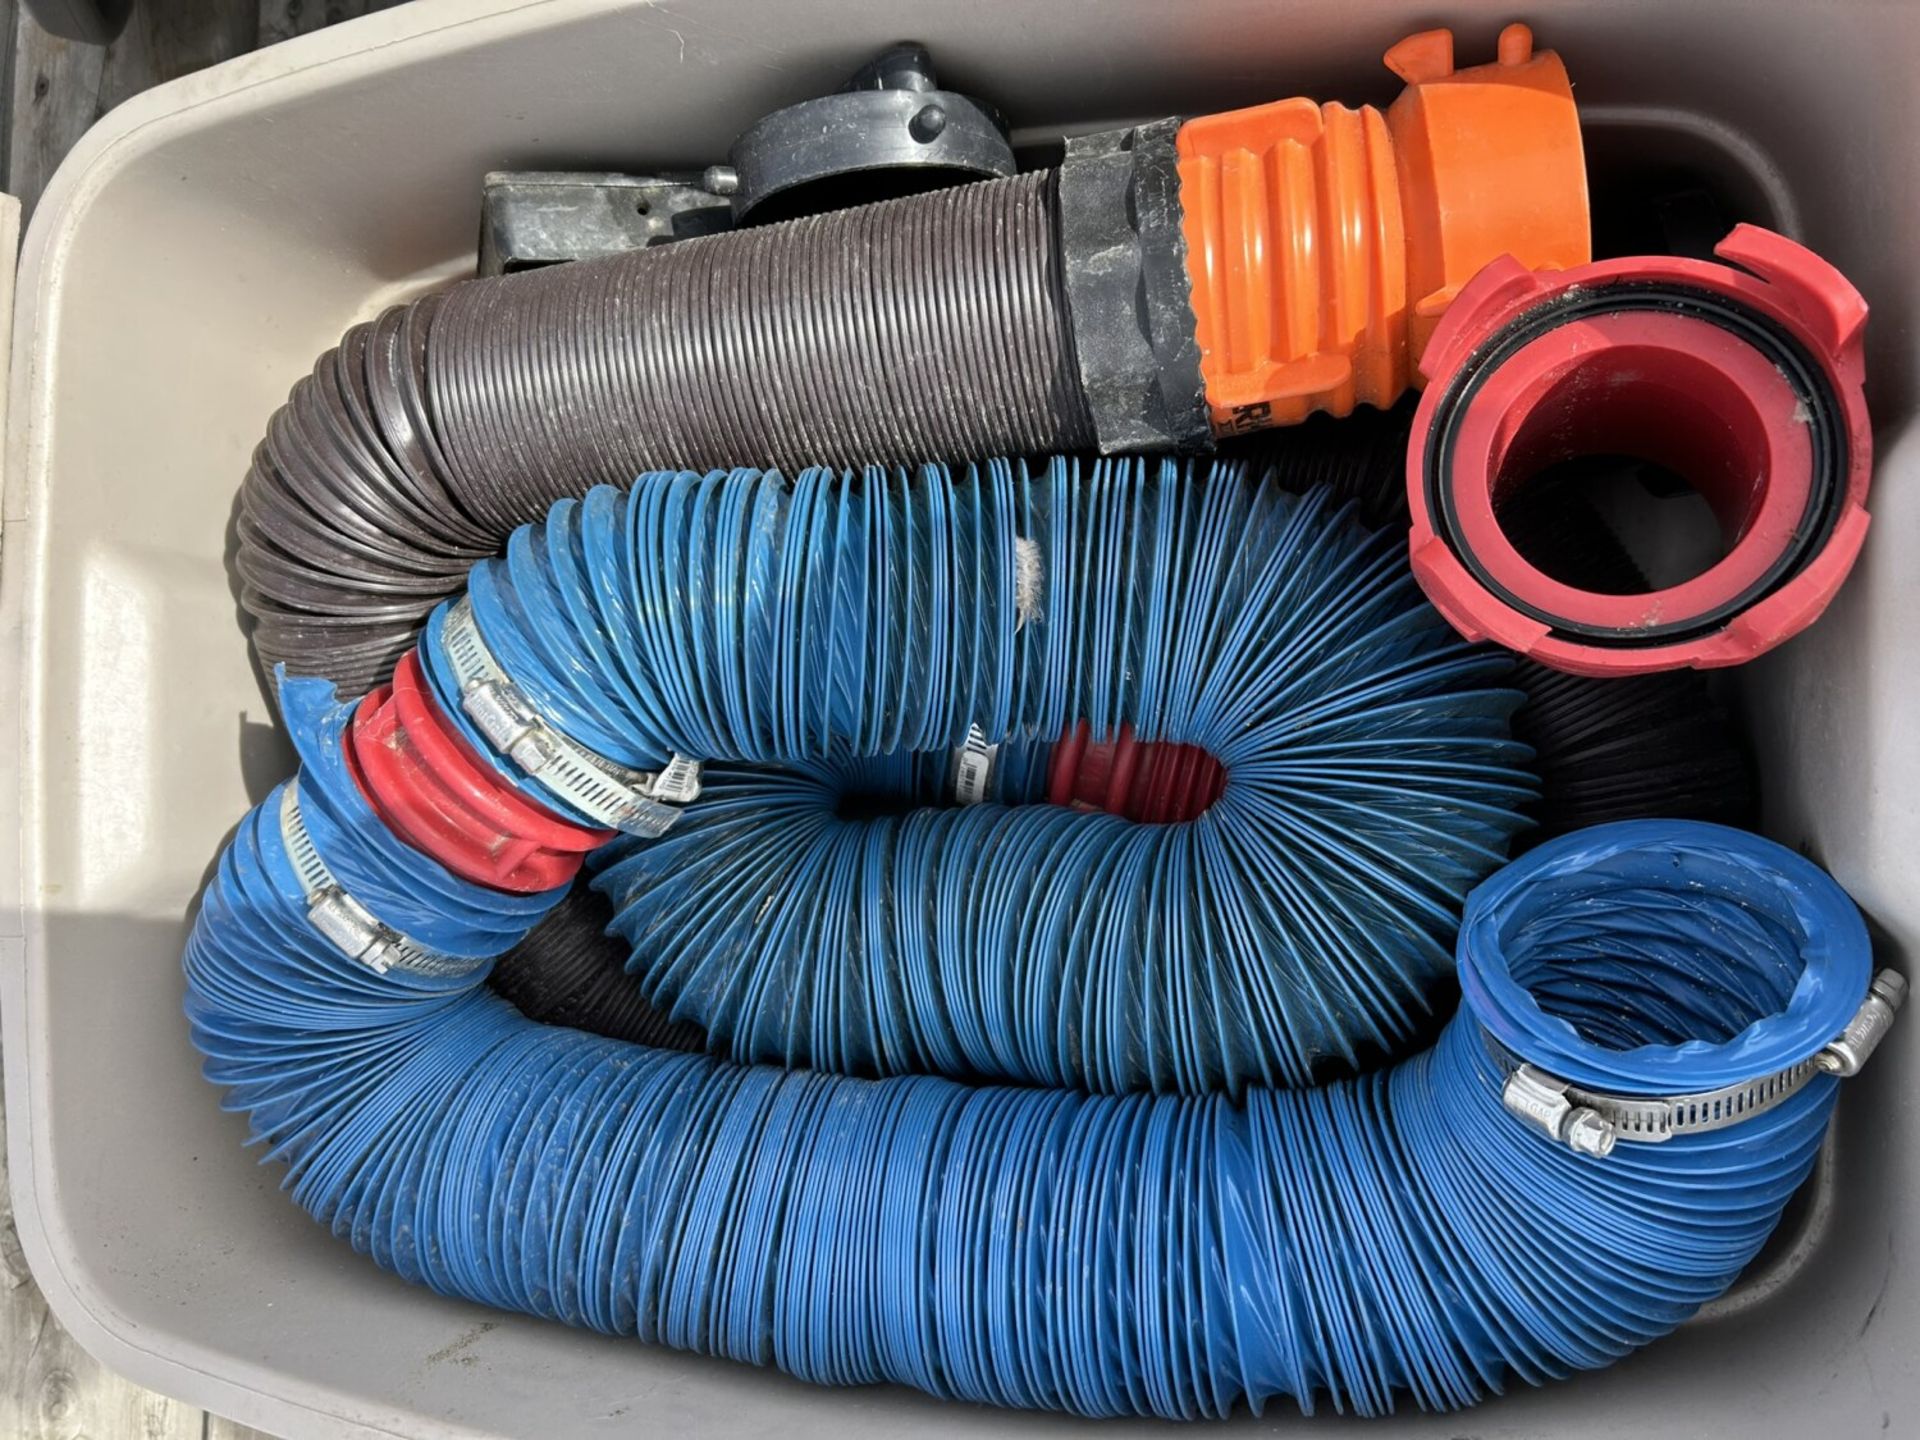 EMERGENCY ROAD FLARES, POLY WHEEL CHALKS, RV SEWER HOSE AND HOSE RACKS, RV PORTABLE WATER SOFTENER - Image 2 of 10